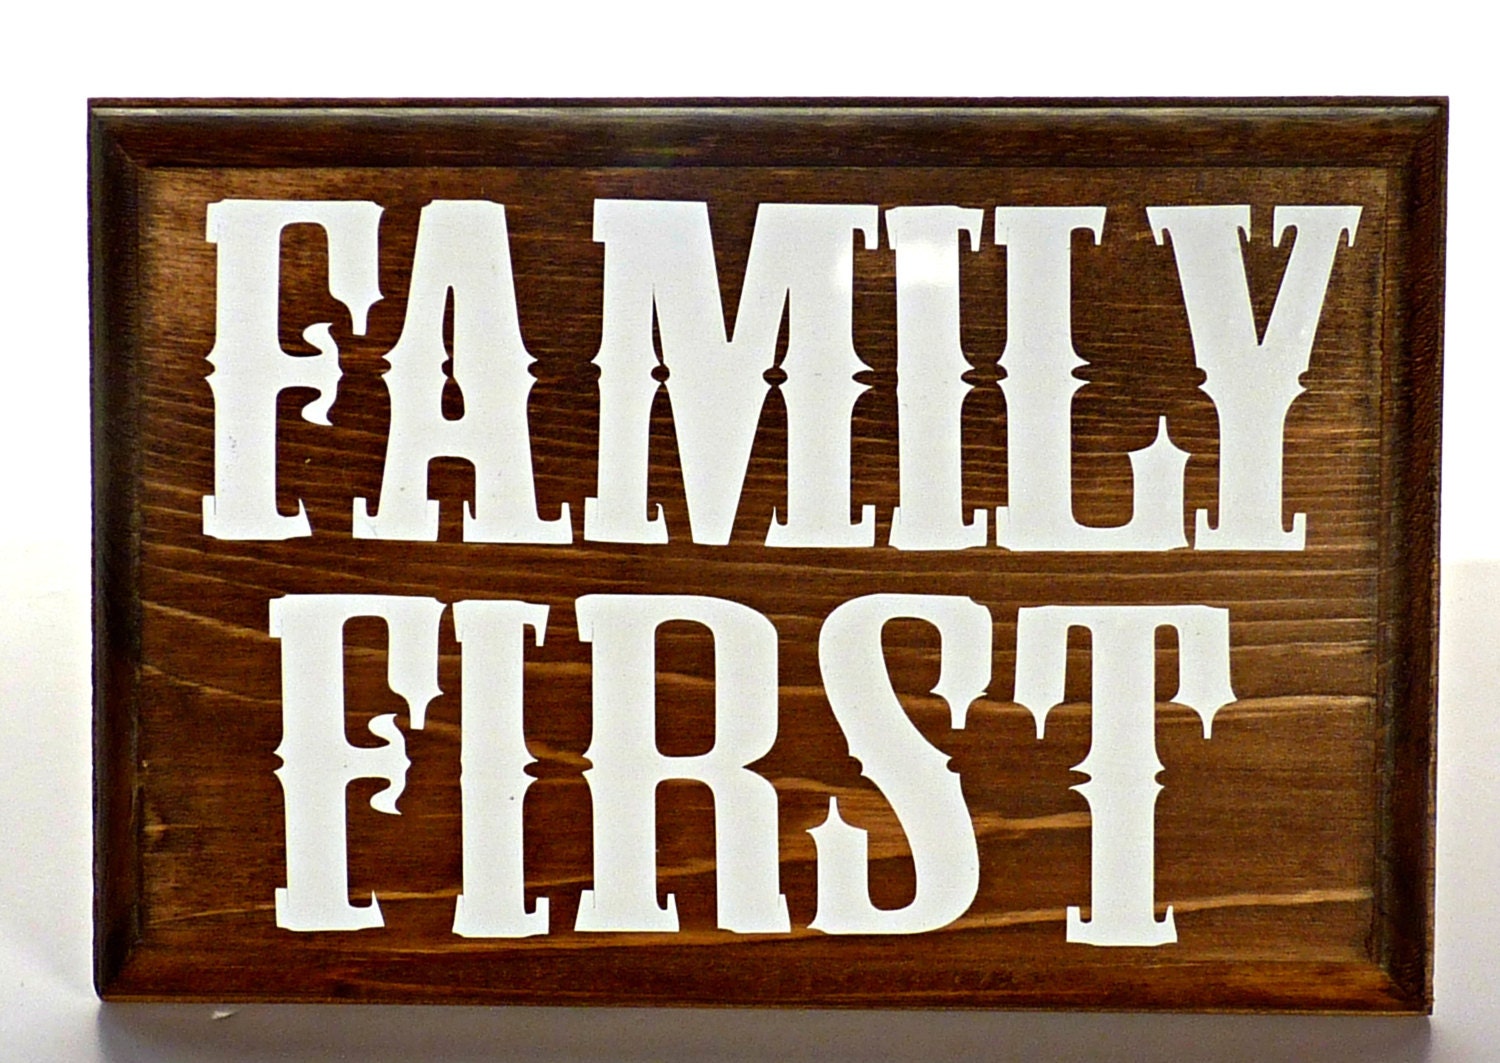 One Wood Wall Plaque Wall Decor Family by KyleeInspiredCrafts